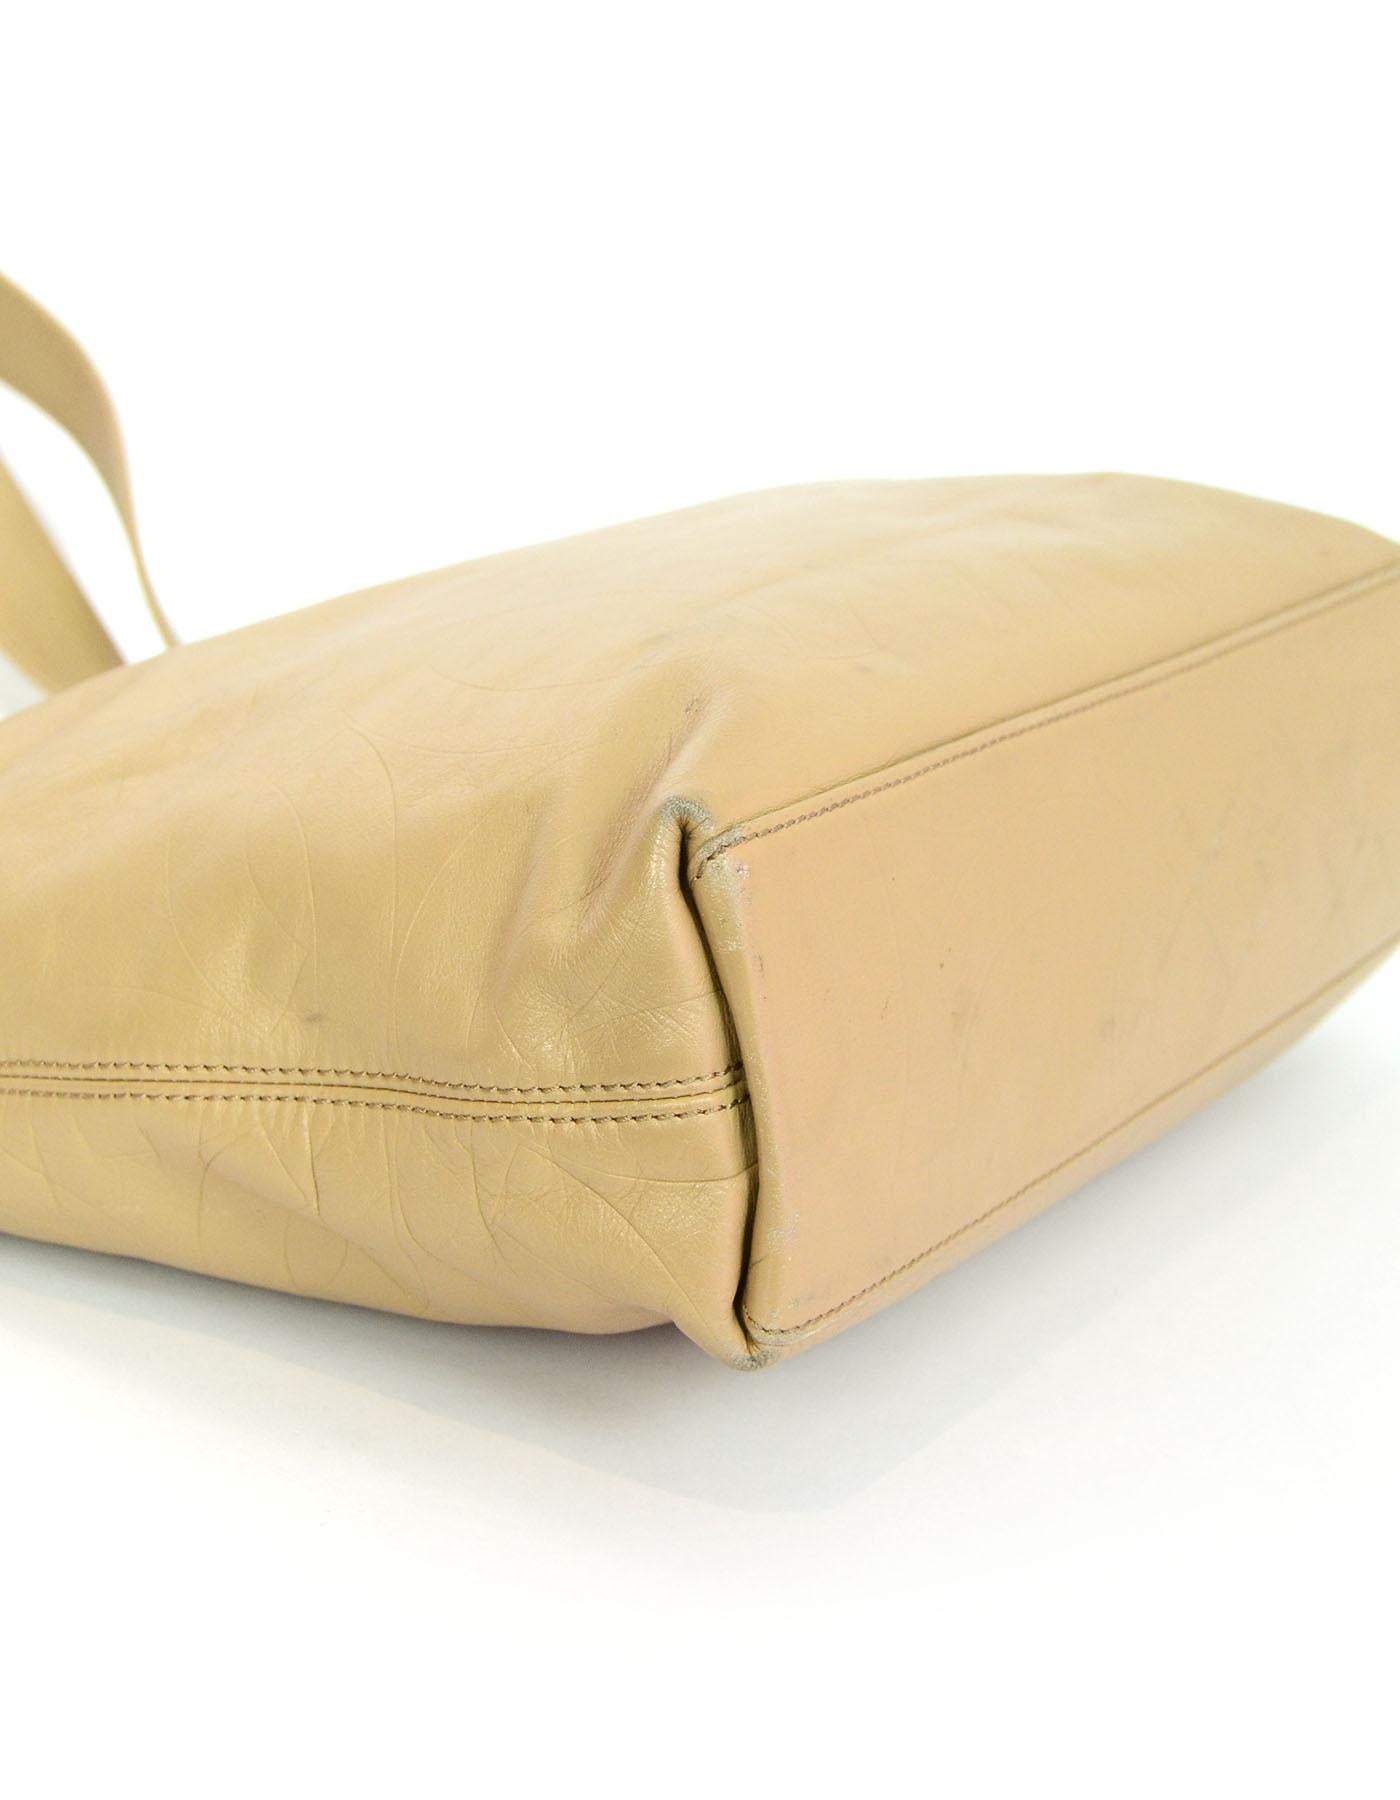 beige leather tote bag